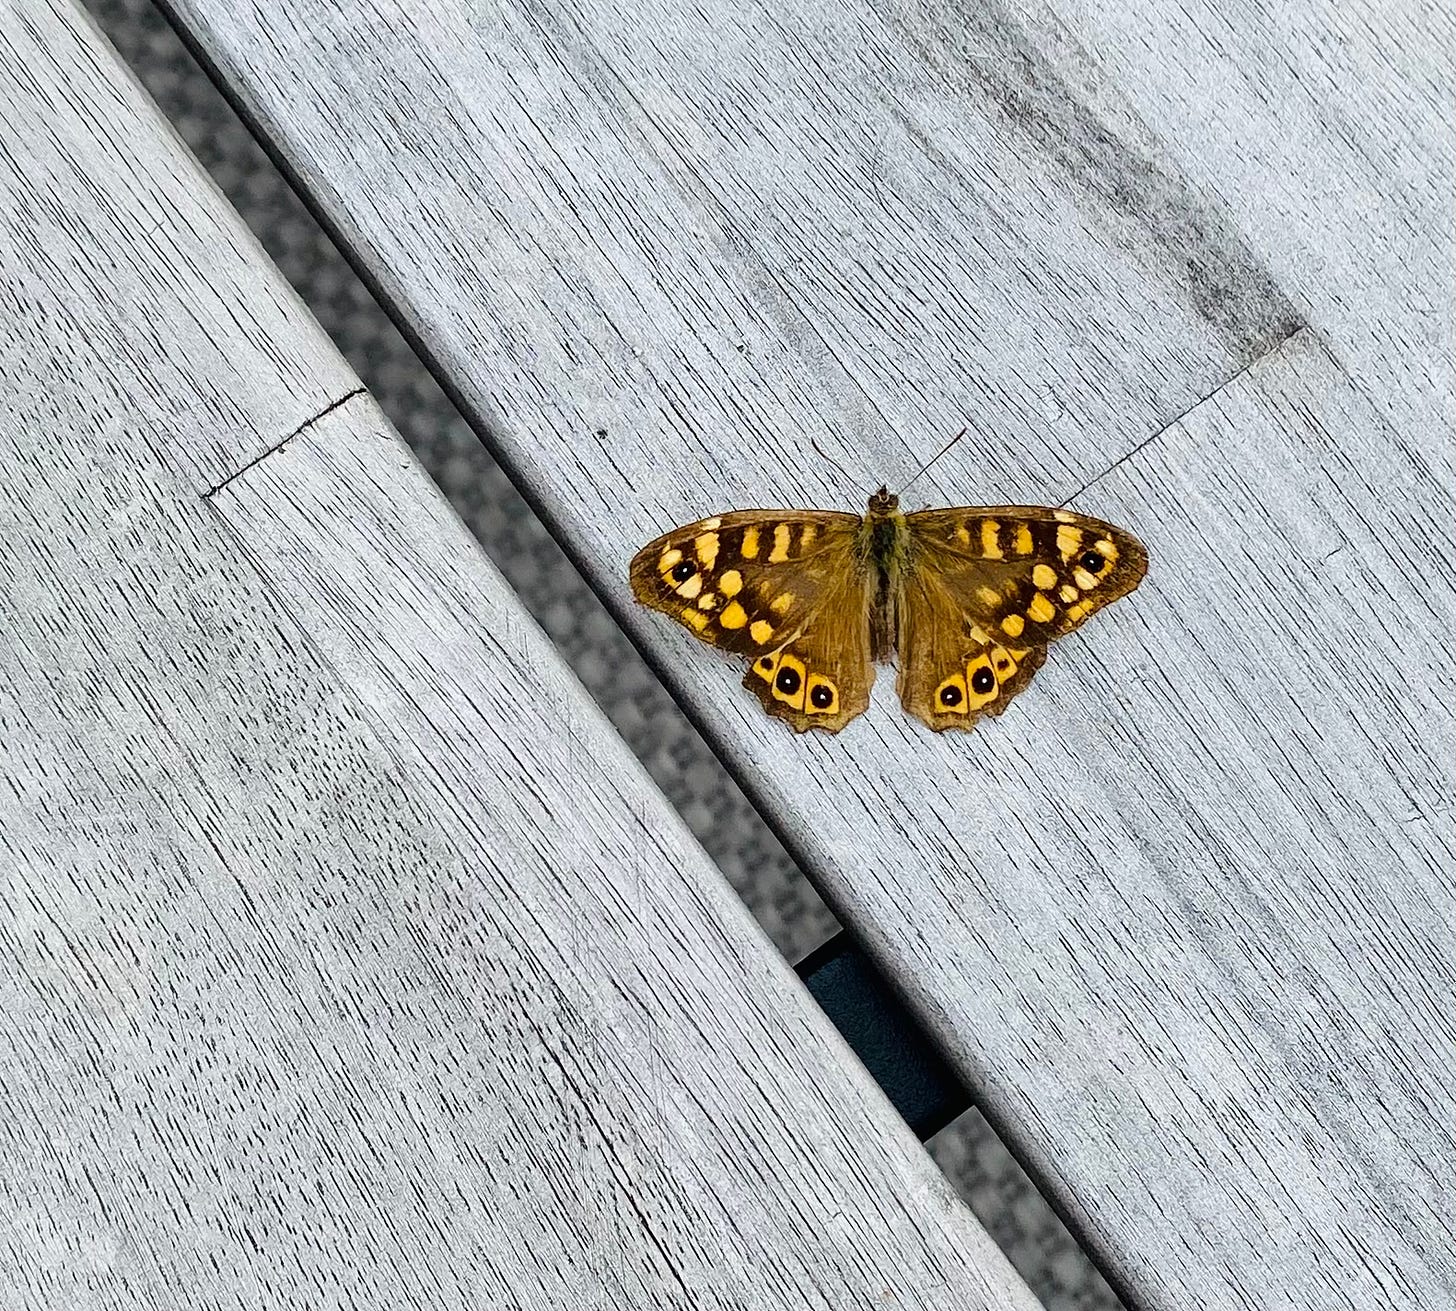 Yellow and brown butterfly, resting on a wooden grey garden table.